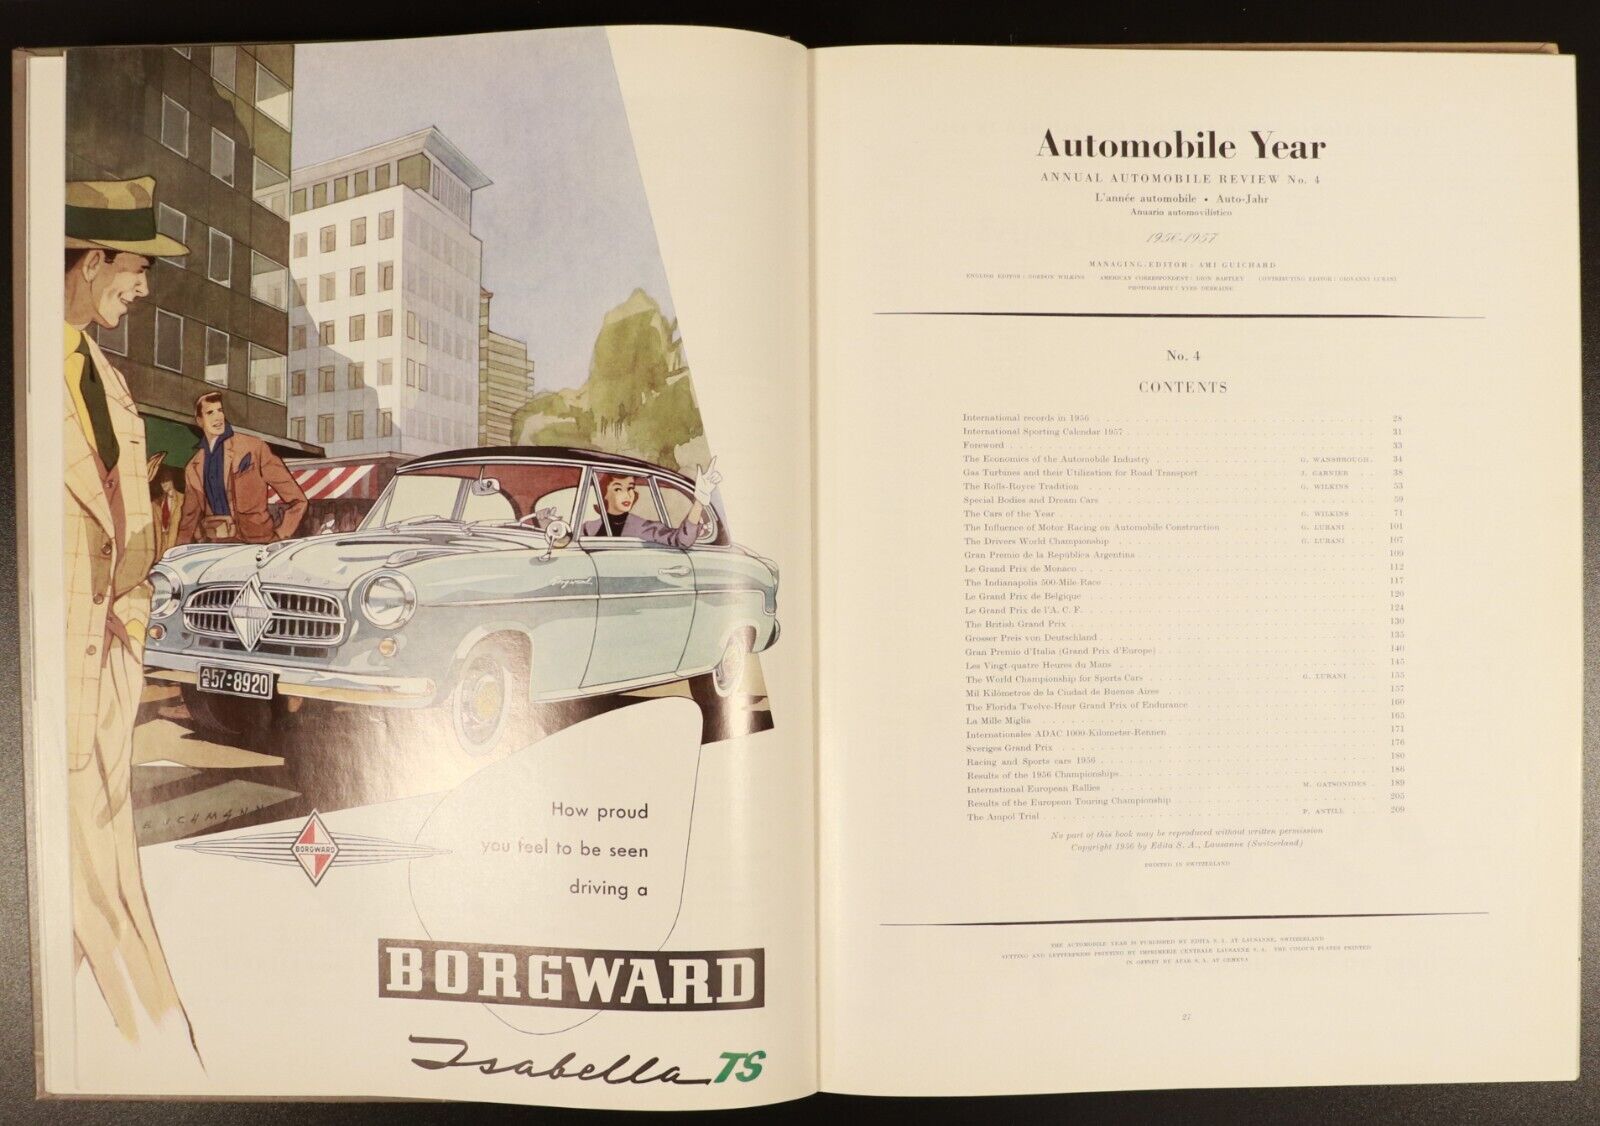 1957 Automobile Year For 1957 A. Guichard Vintage Illustrated Automotive Book